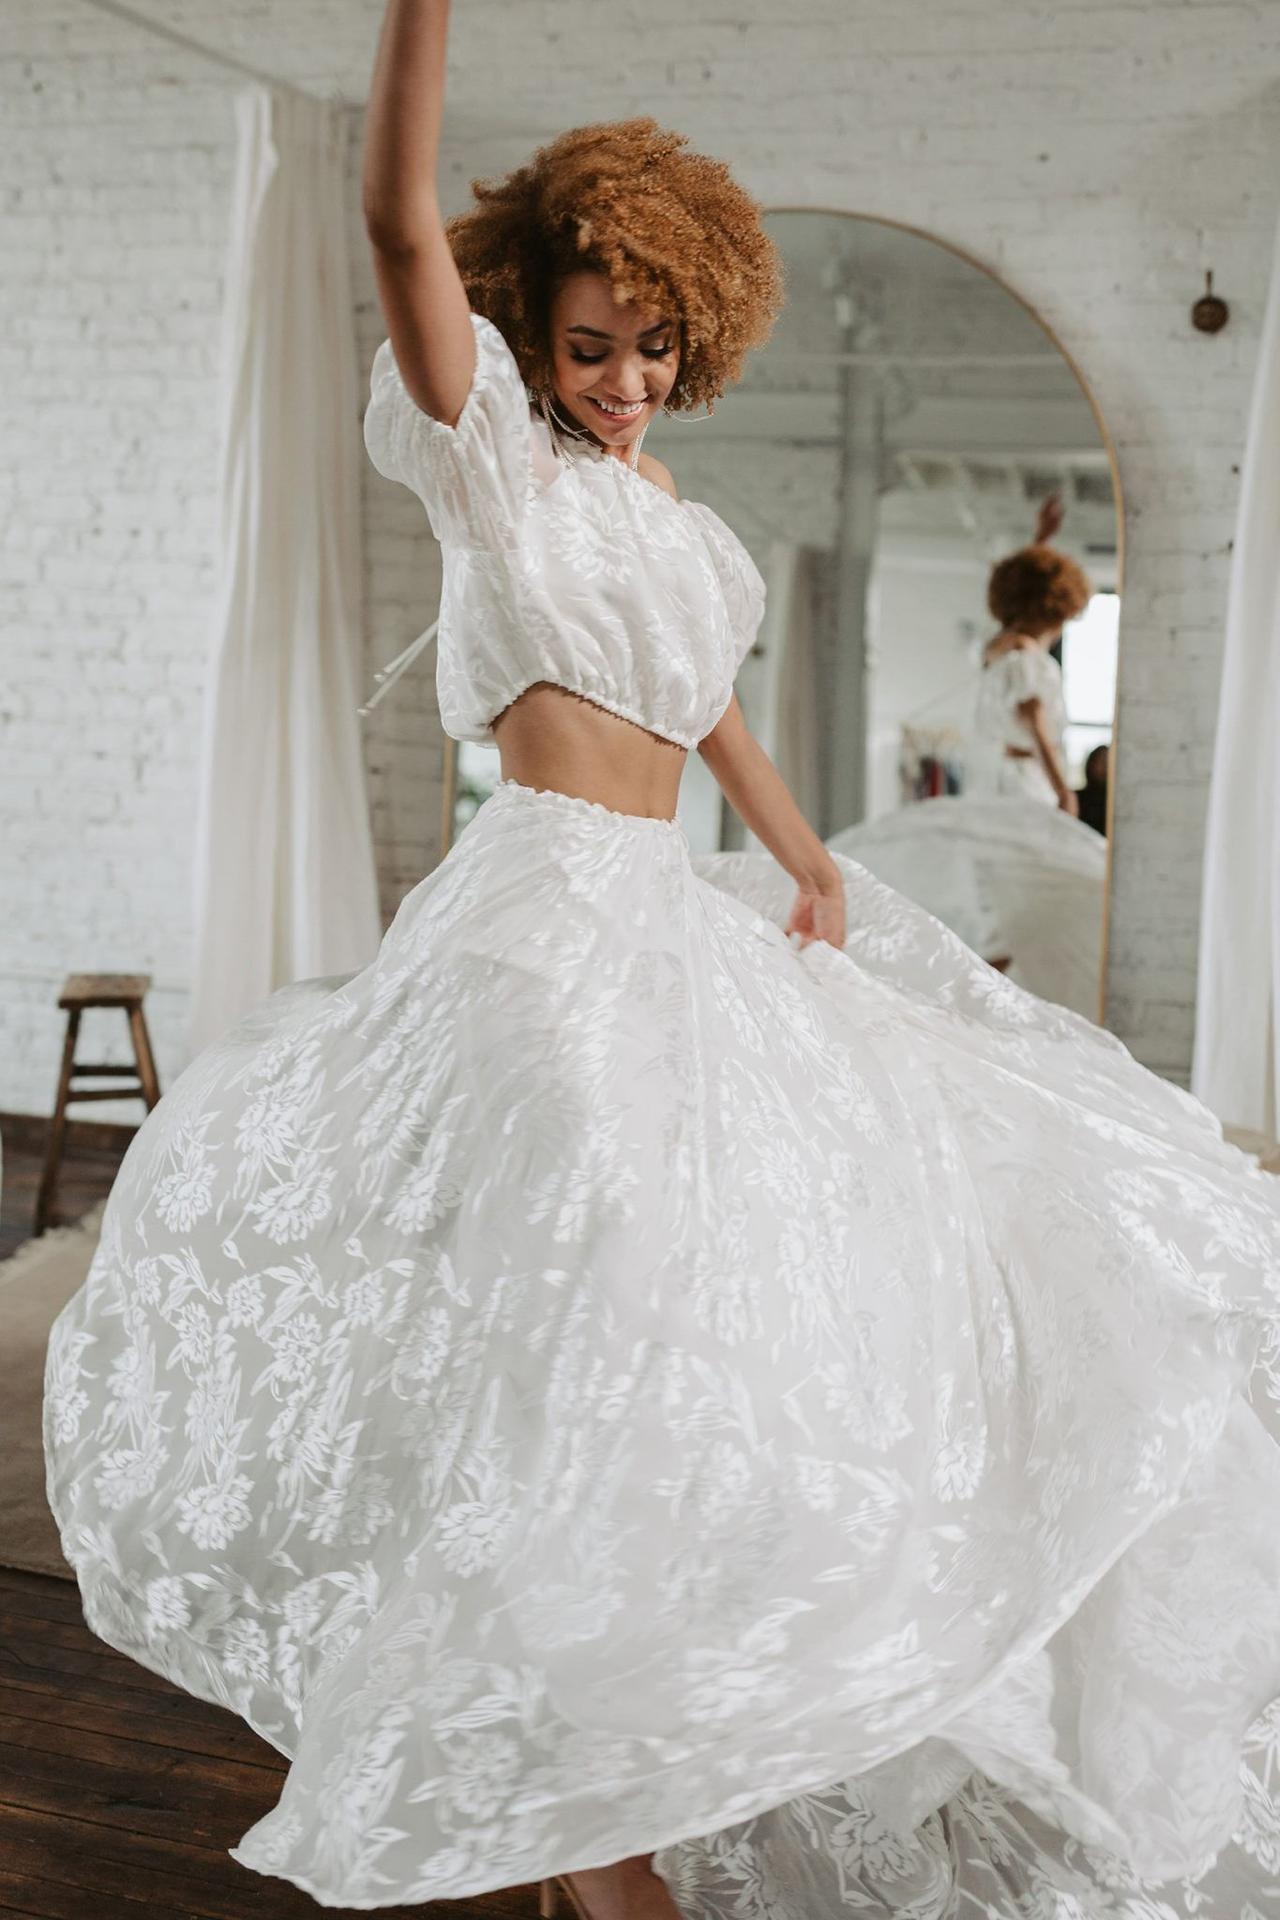 Trending Wedding Outfits and Dress Styles for Women in 2023